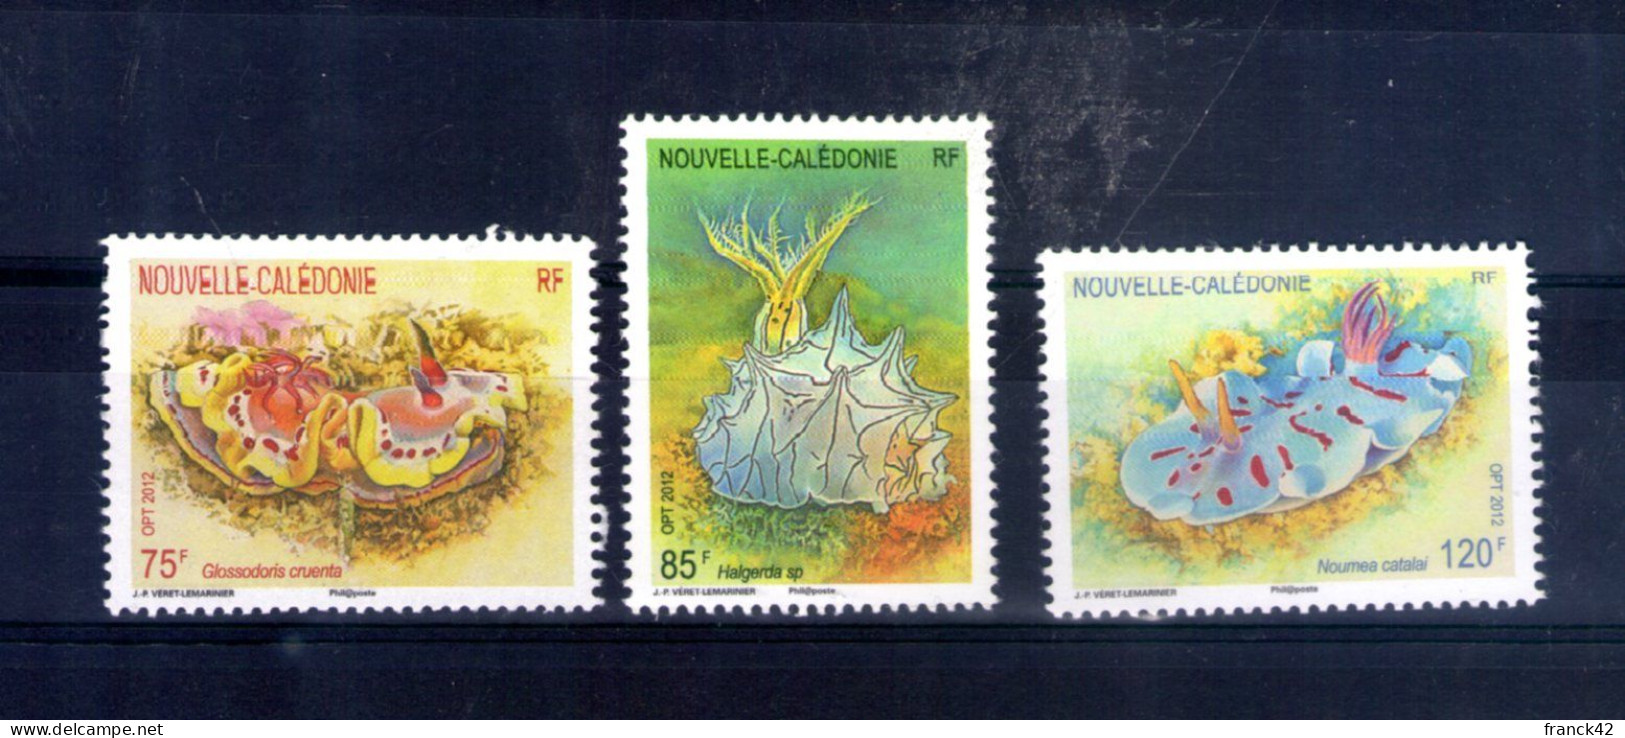 Nouvelle Calédonie. Nudibranches. 2012 - Unused Stamps